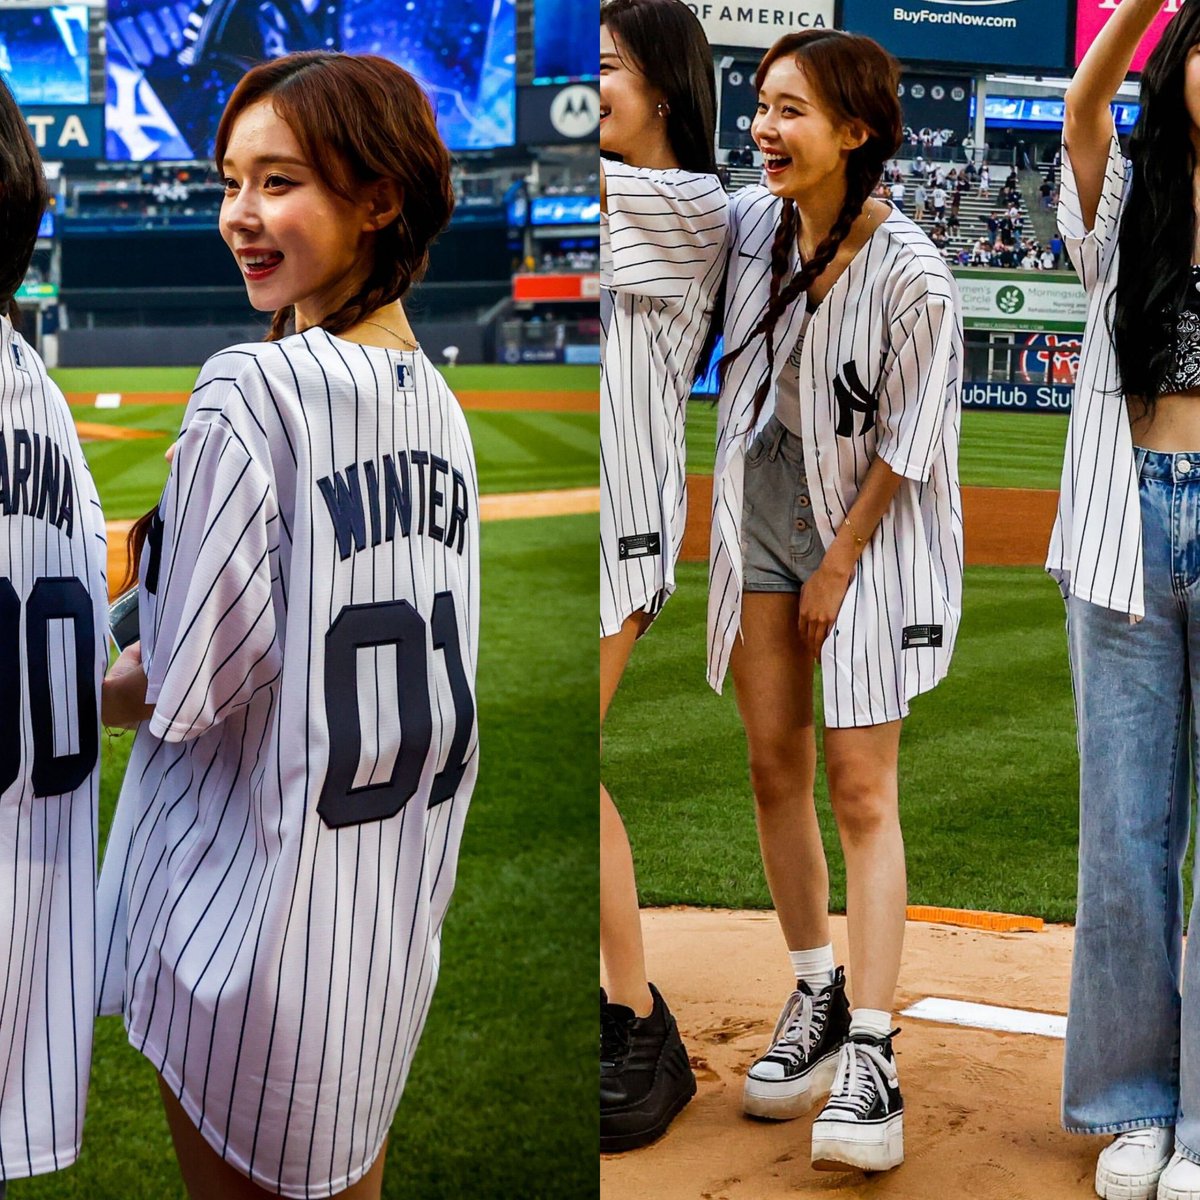 First pitch for the  @Yankees ⚾

#WINTER #윈터 #aespa #에스파 #ウィンター #金旼炡 #冬子 @aespa_official